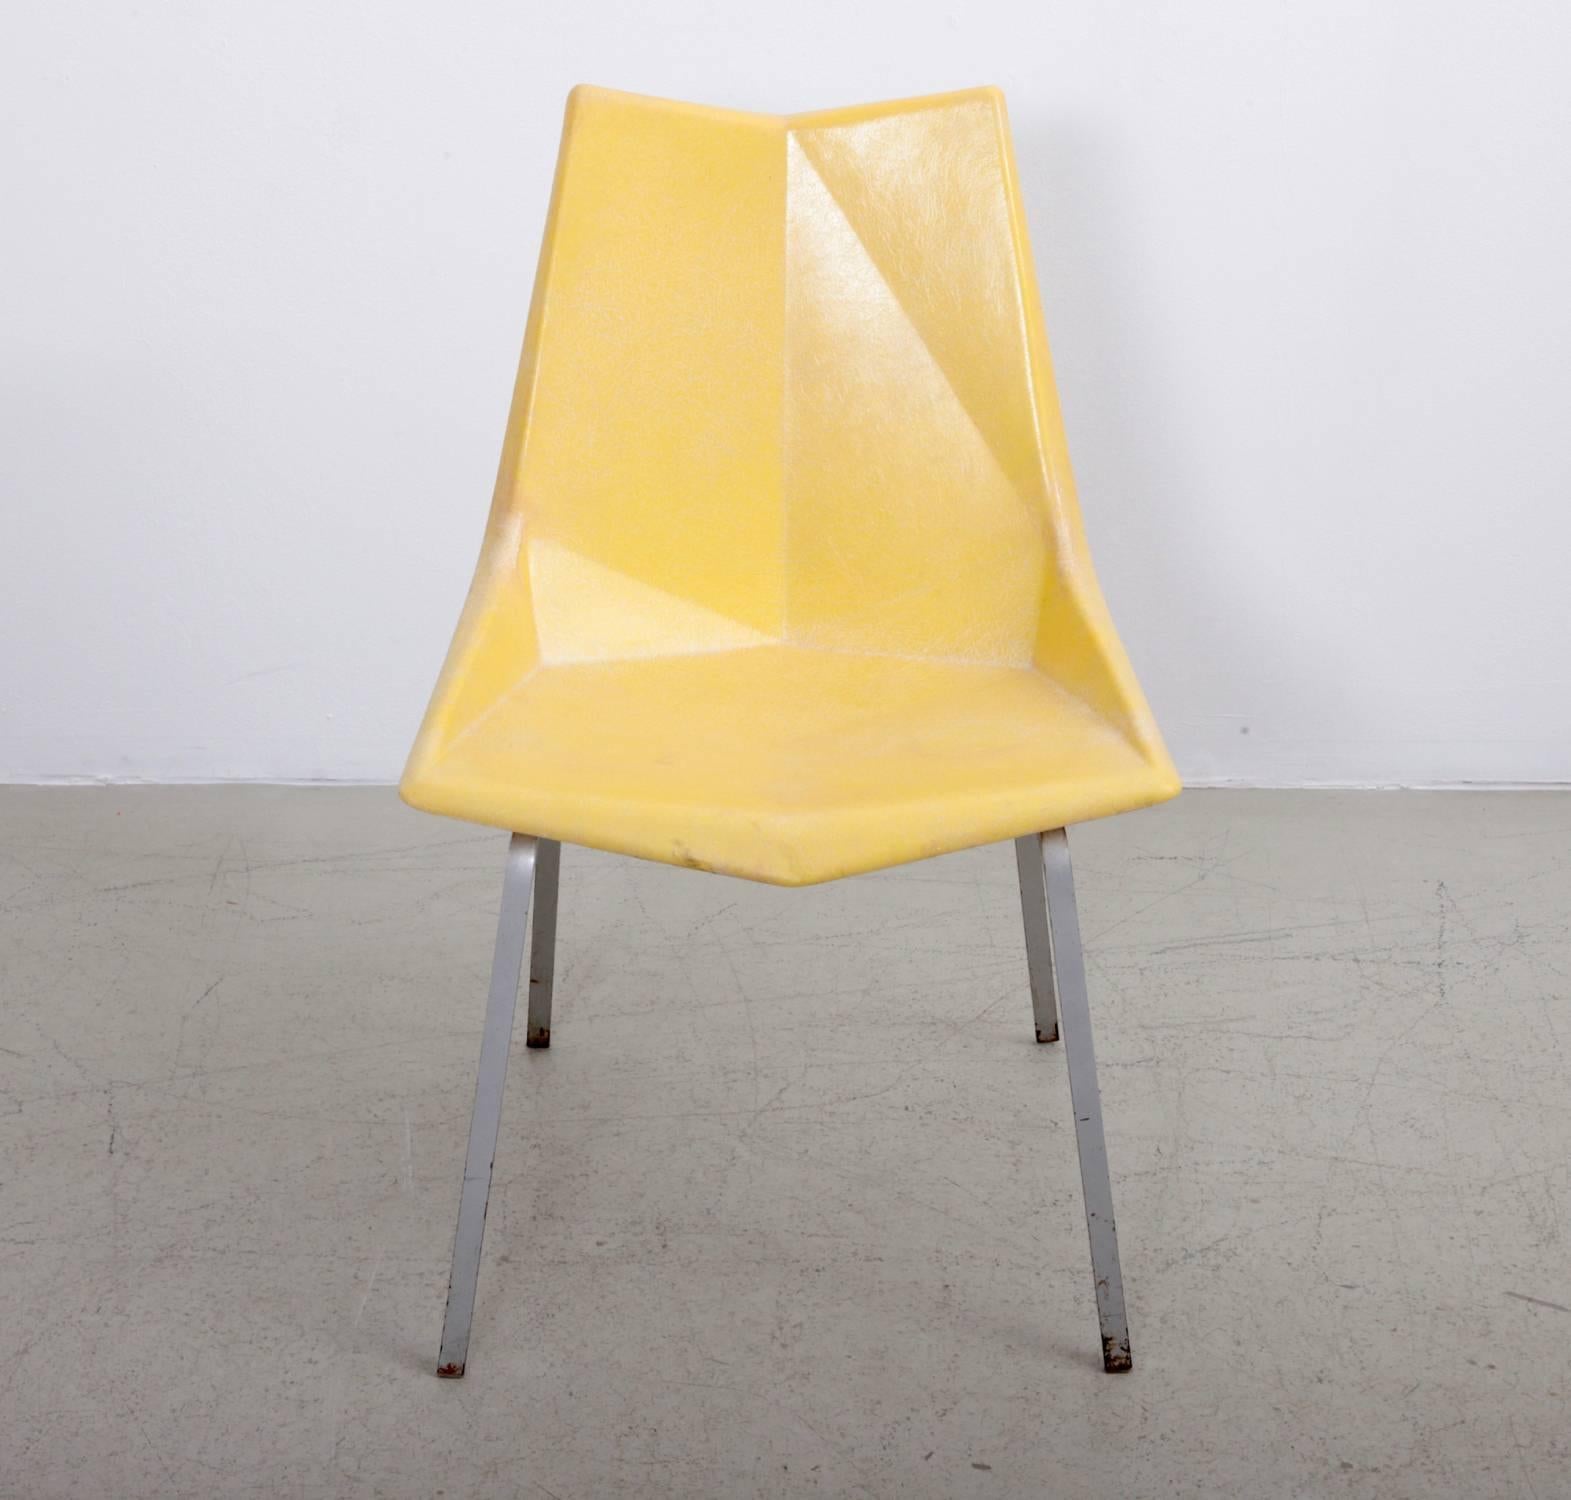 A 1950s yellow Paul McCobb Origami chair for St. John seating. The fiberglass seat is molded at angles, reminiscent of the Japanese origami technique. The chair stands on a rare angled solid iron base. In good and original condition.

